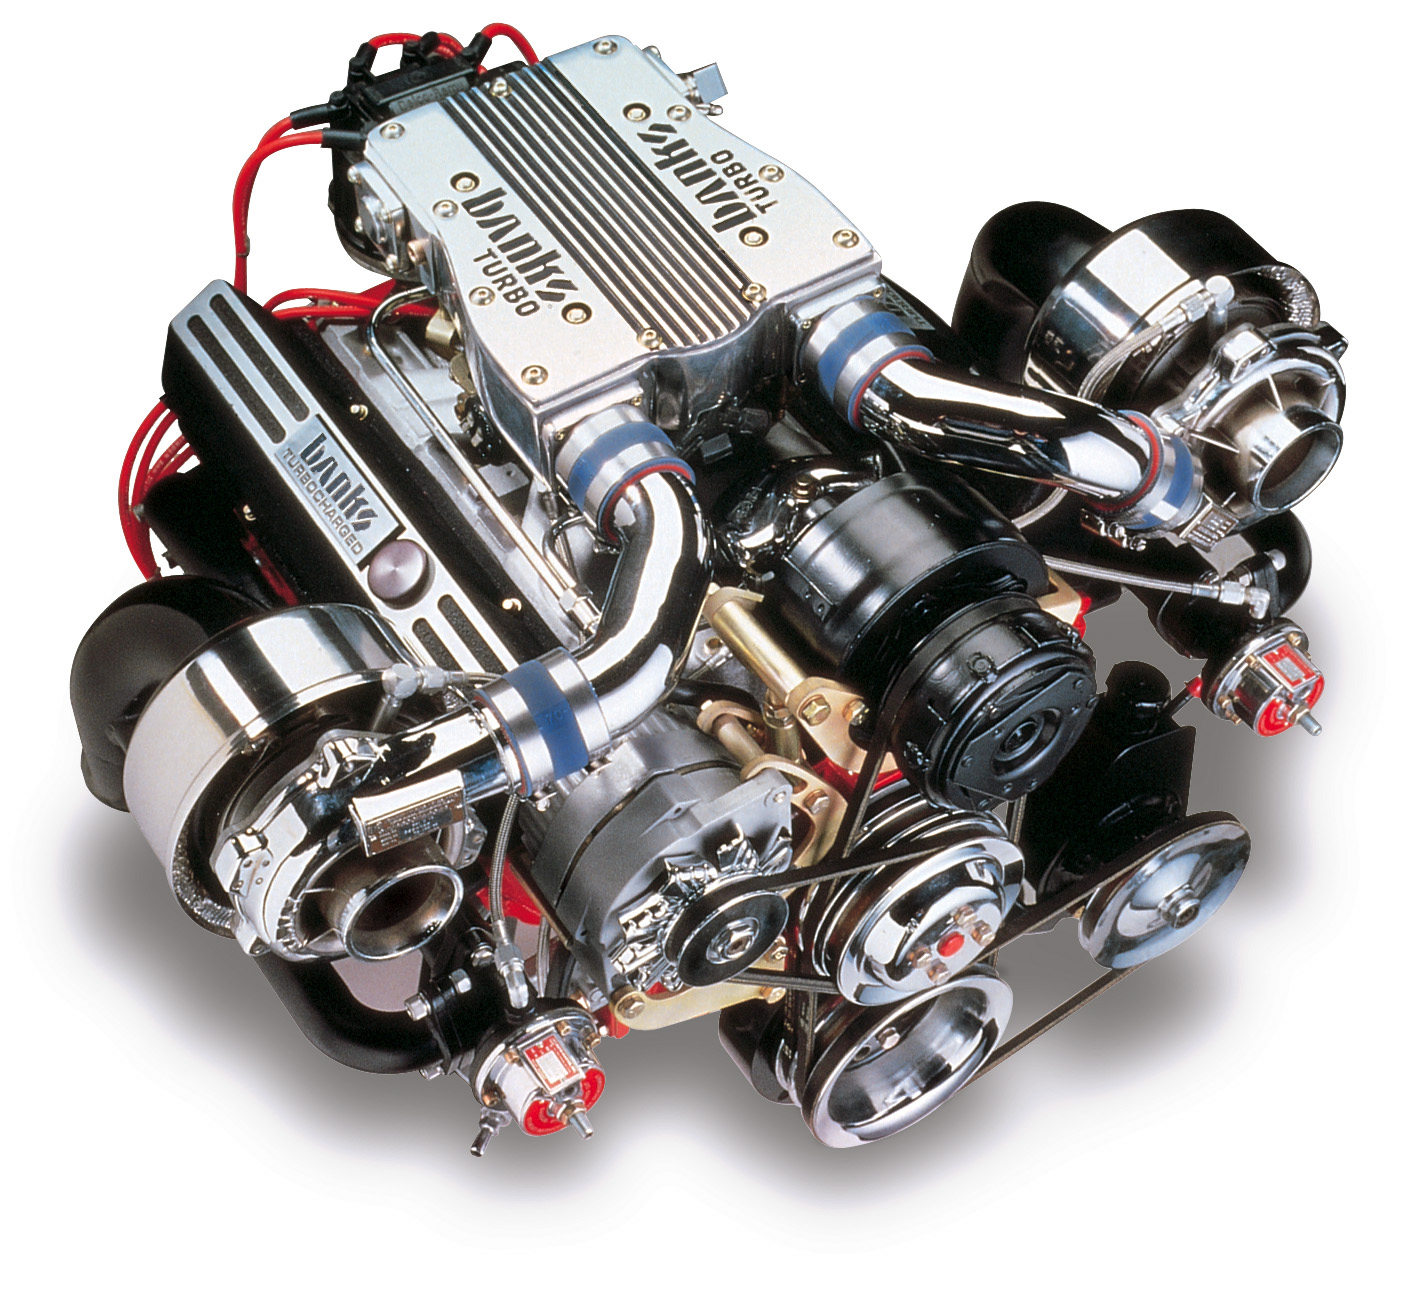 Top 5 Most Problematic Turbo Engines!